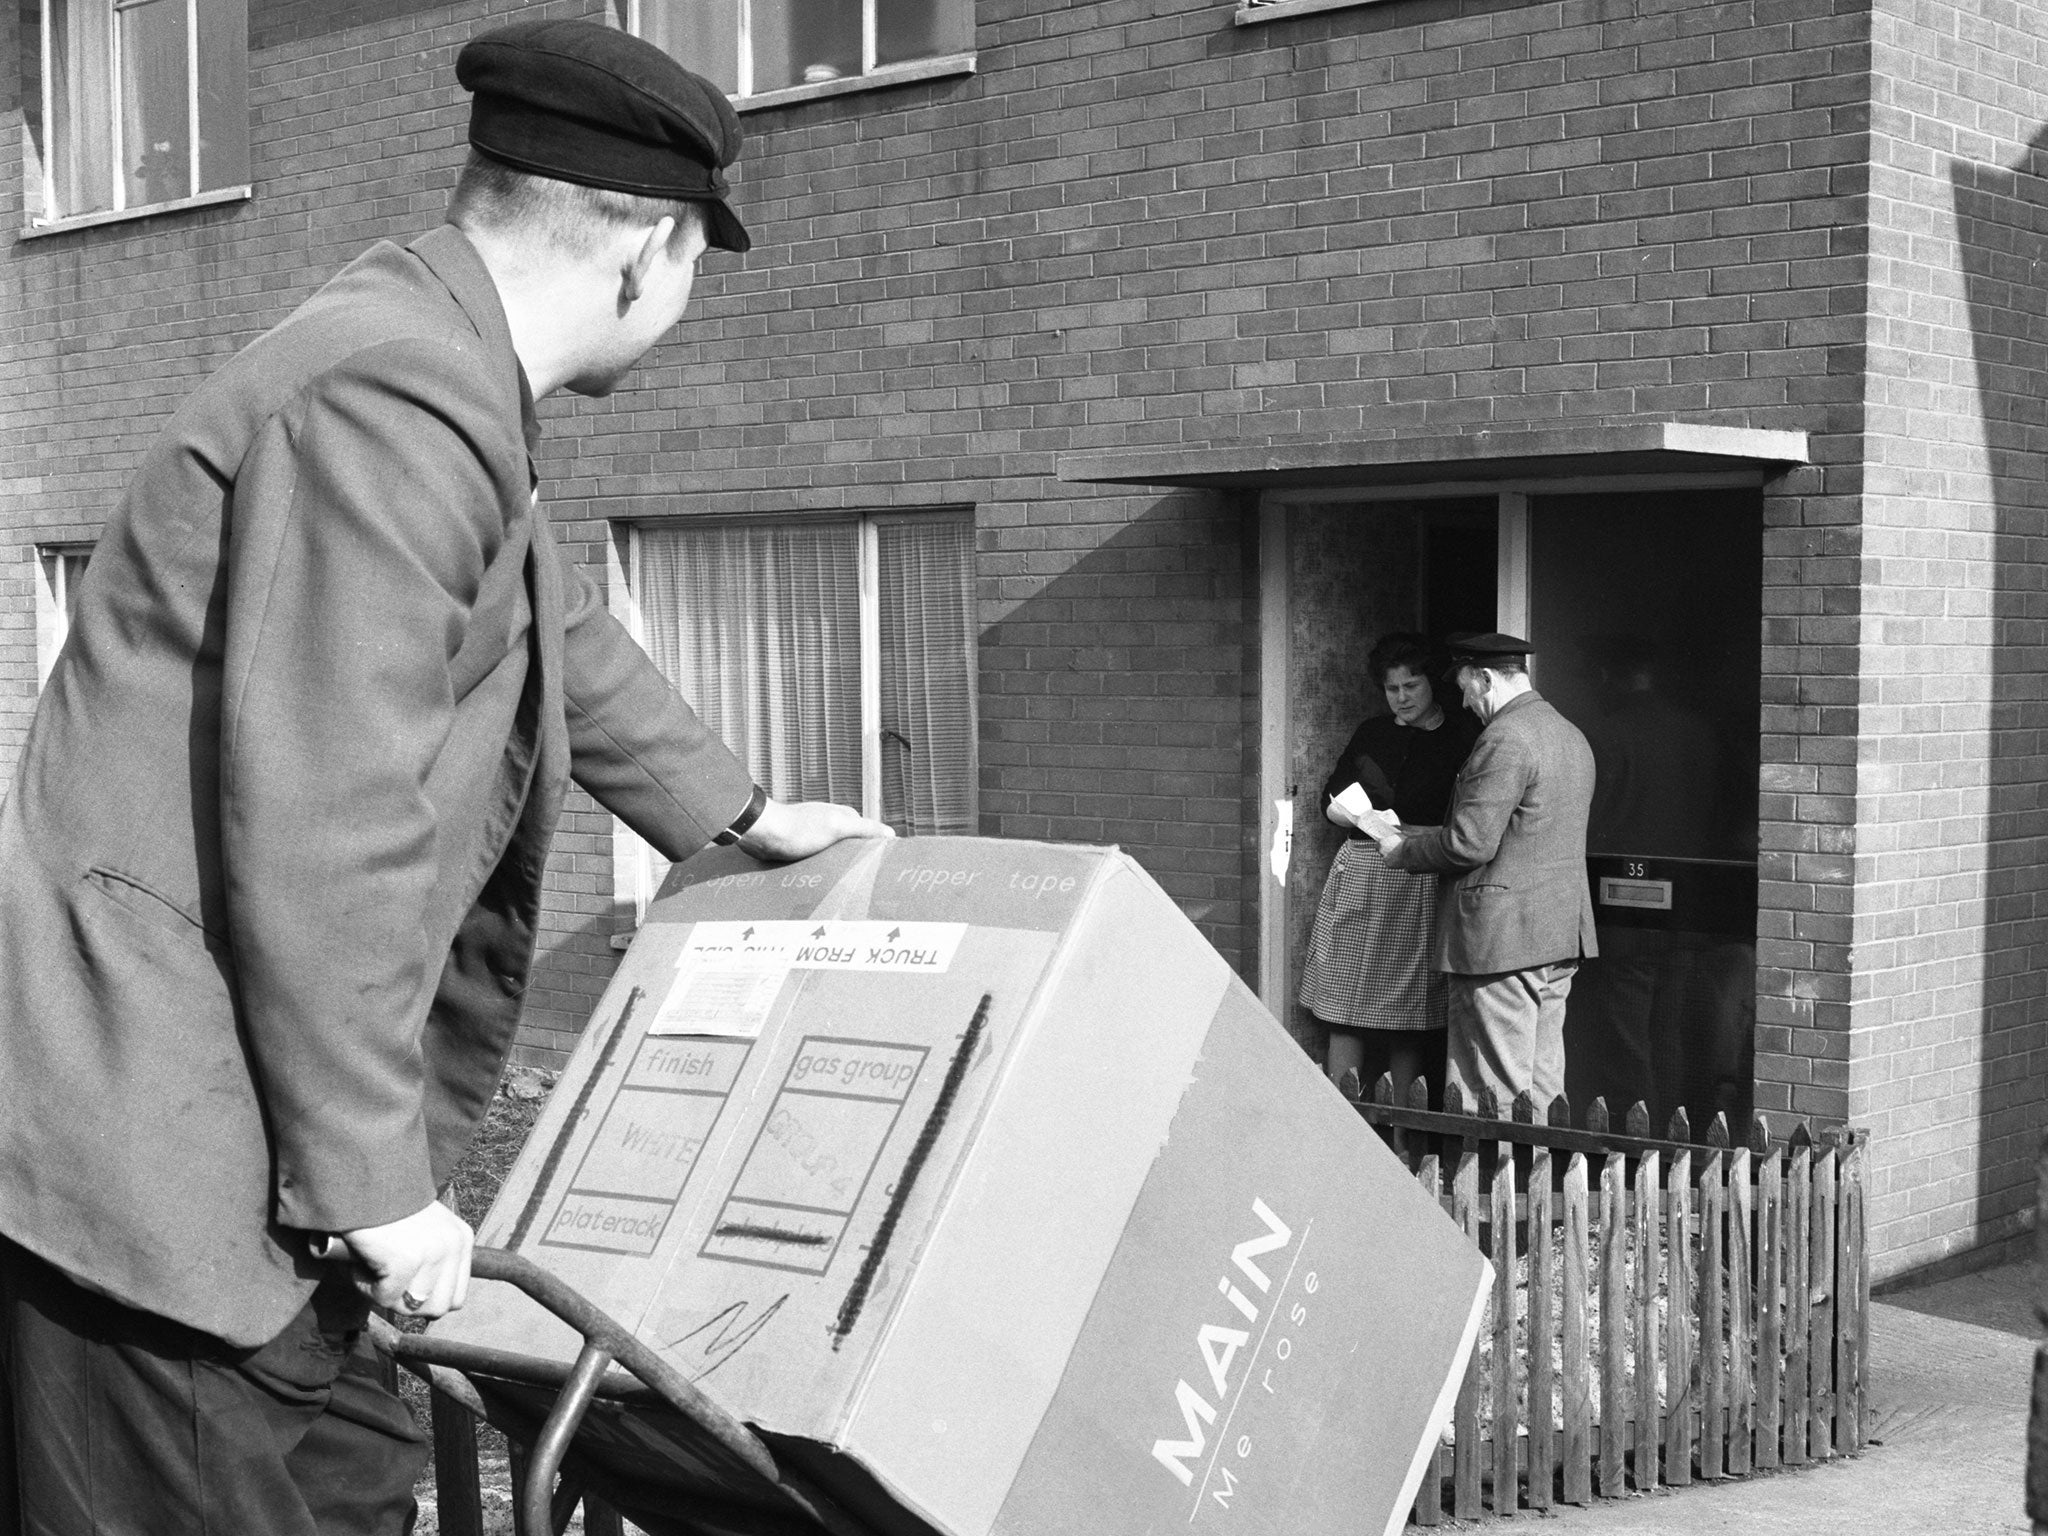 A Gas Board delivery in the 1960s. Today’s retailers are increasingly looking to use their own staff again to deliver big ticket items